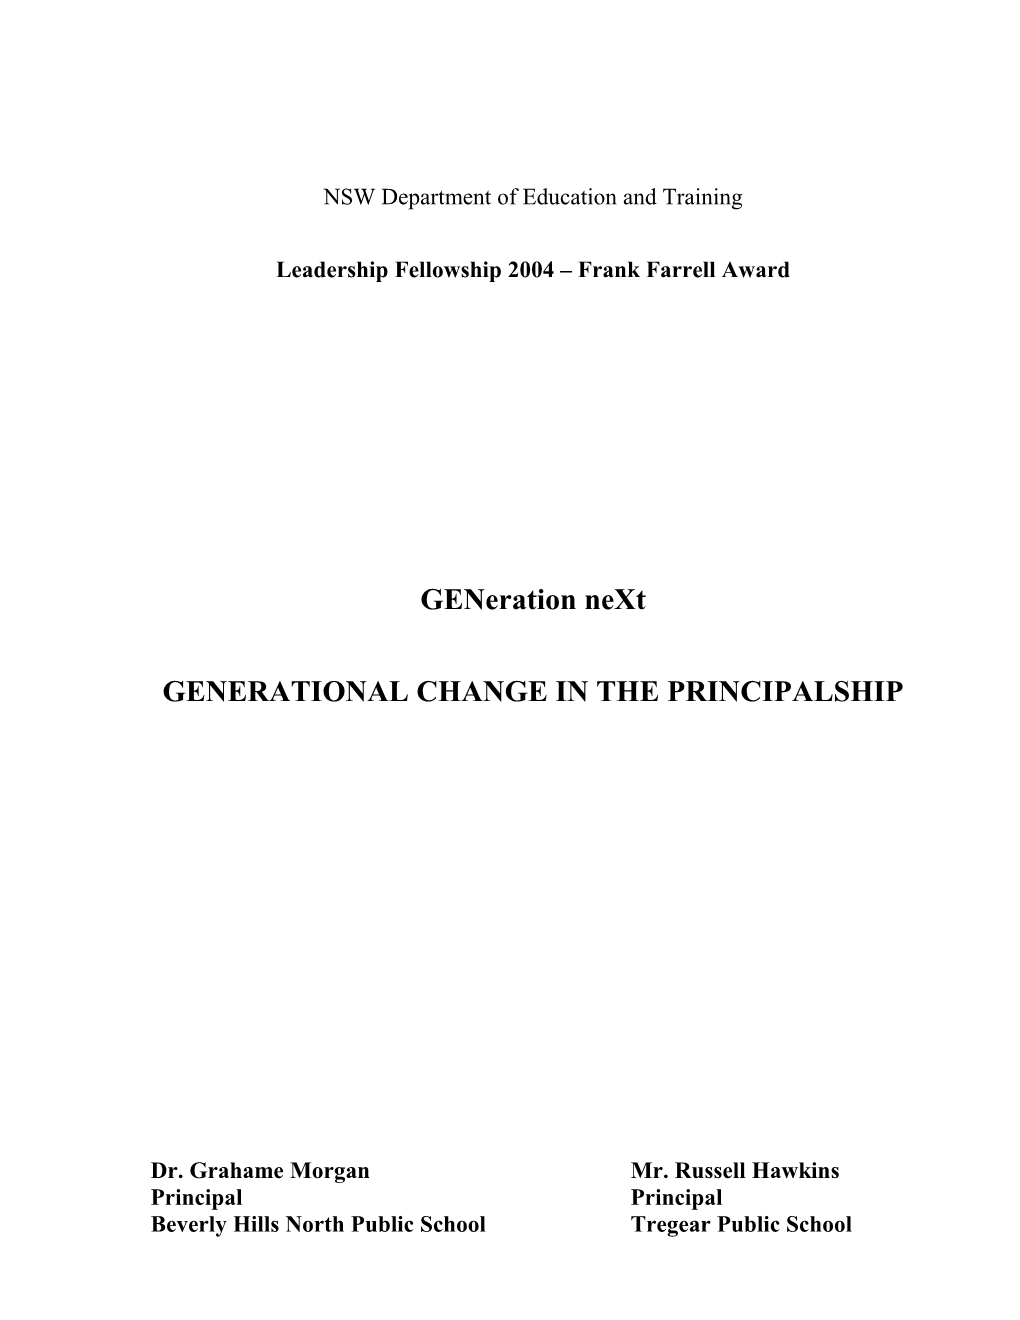 Generational Change In The Principalship